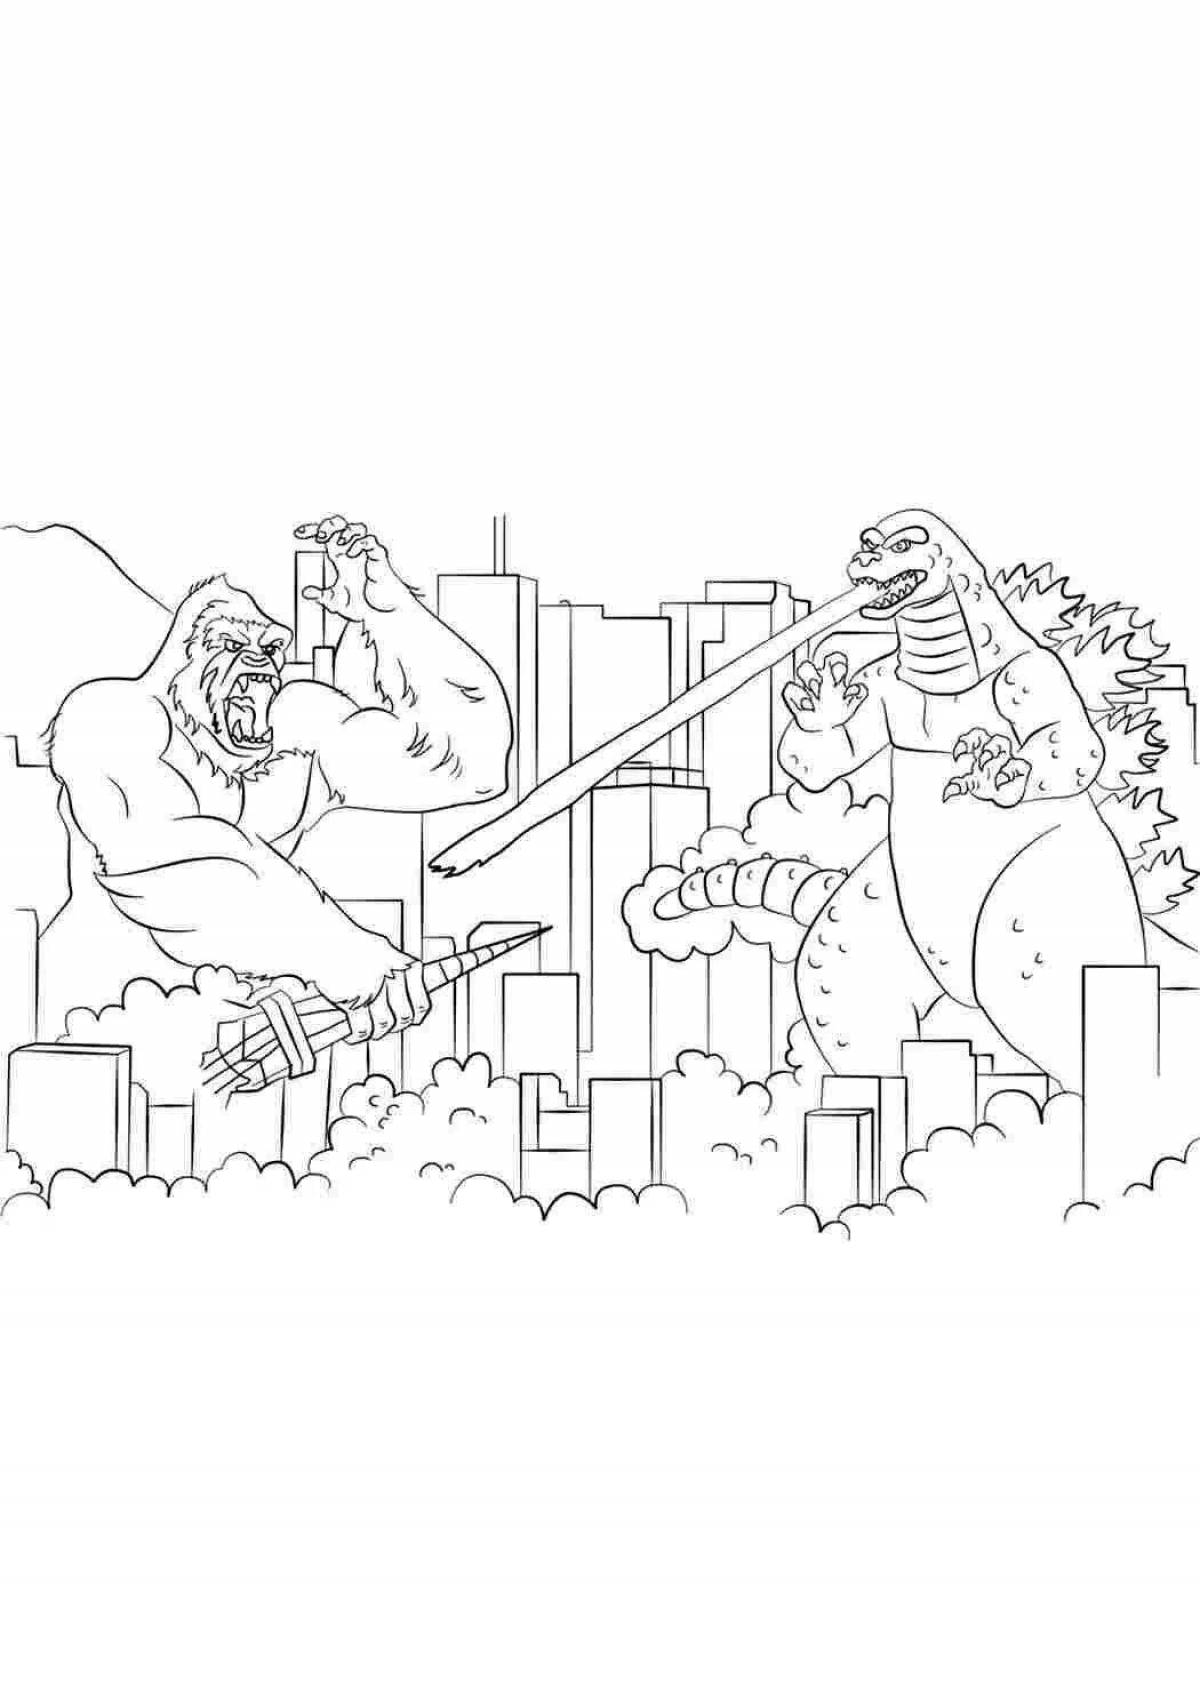 Cute king kong coloring book for kids